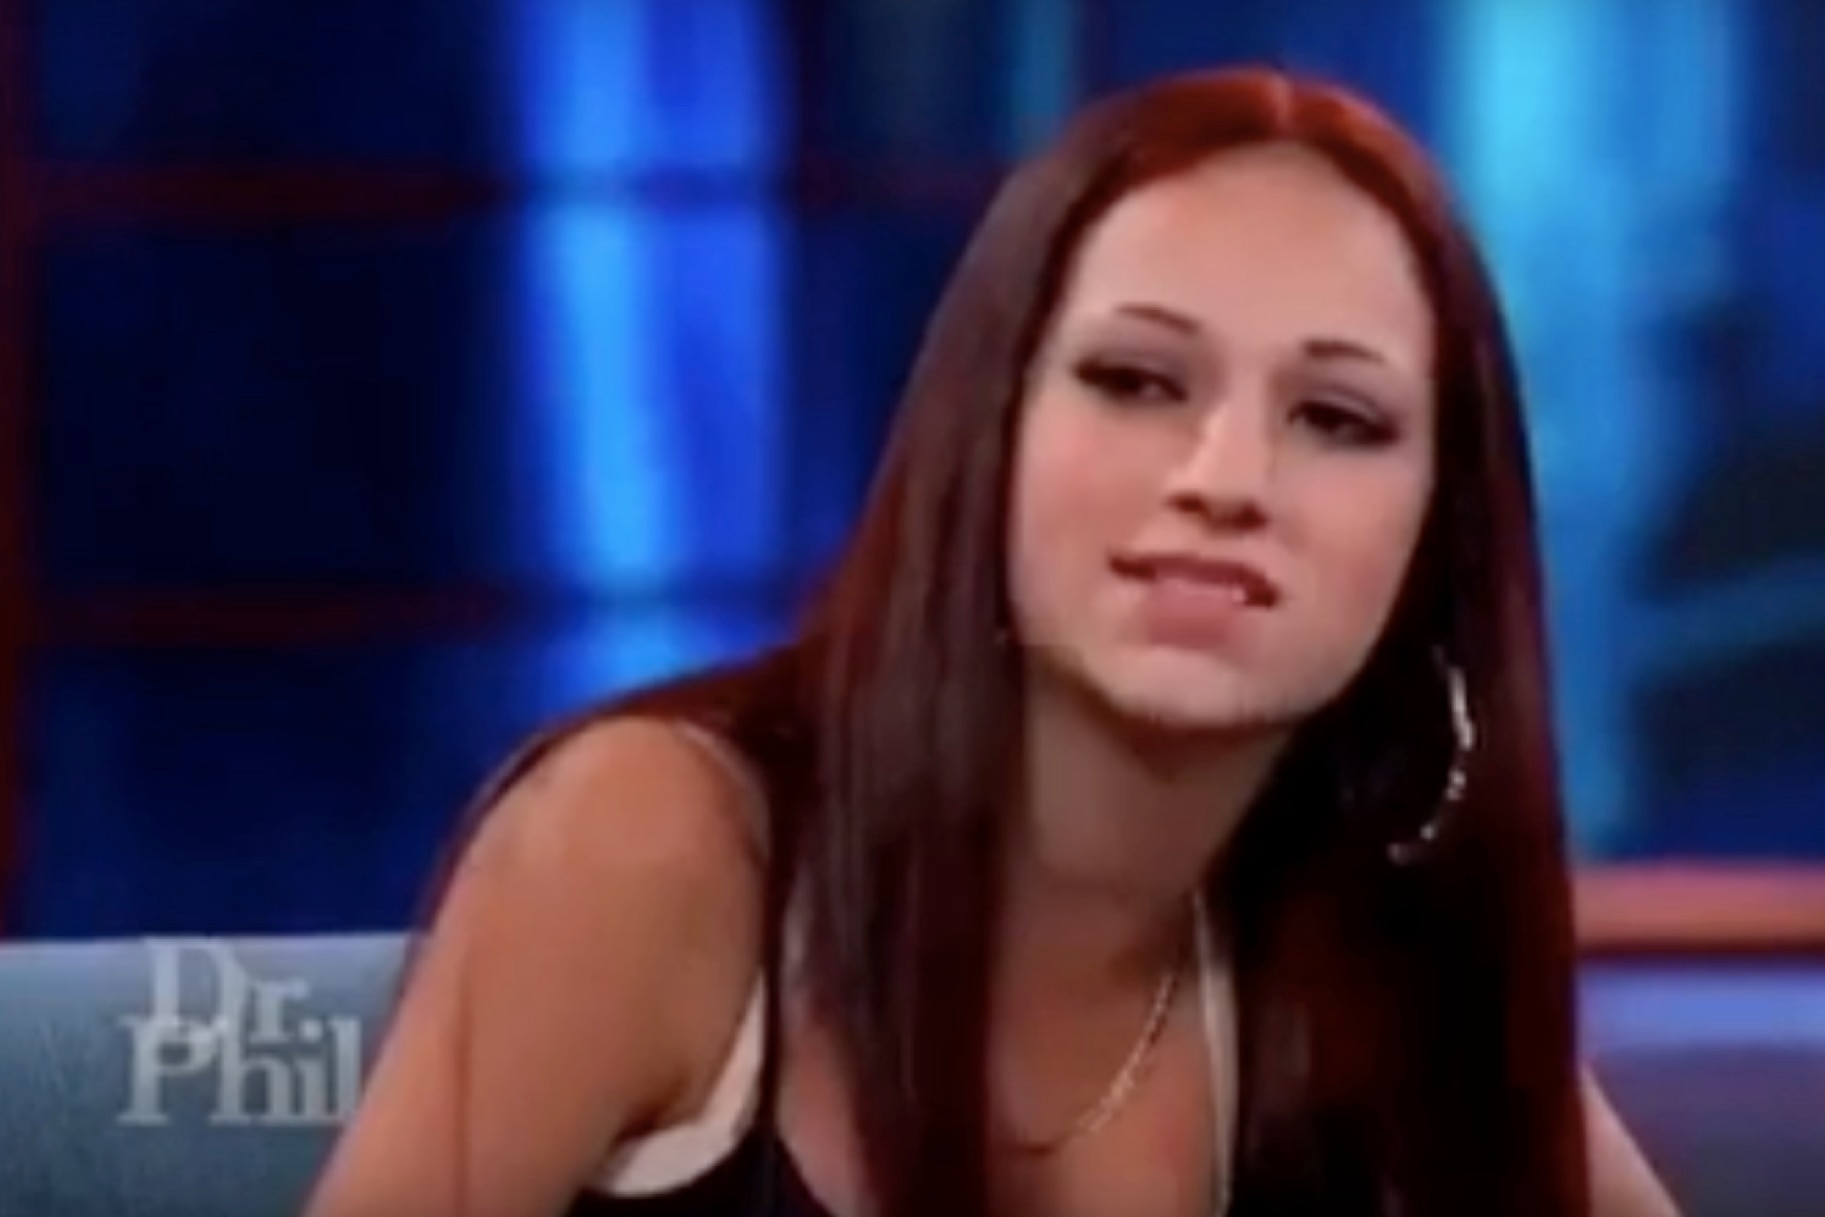 The Cash Me Ousside Girl Started An Insane Bar Brawl Video Very Real 